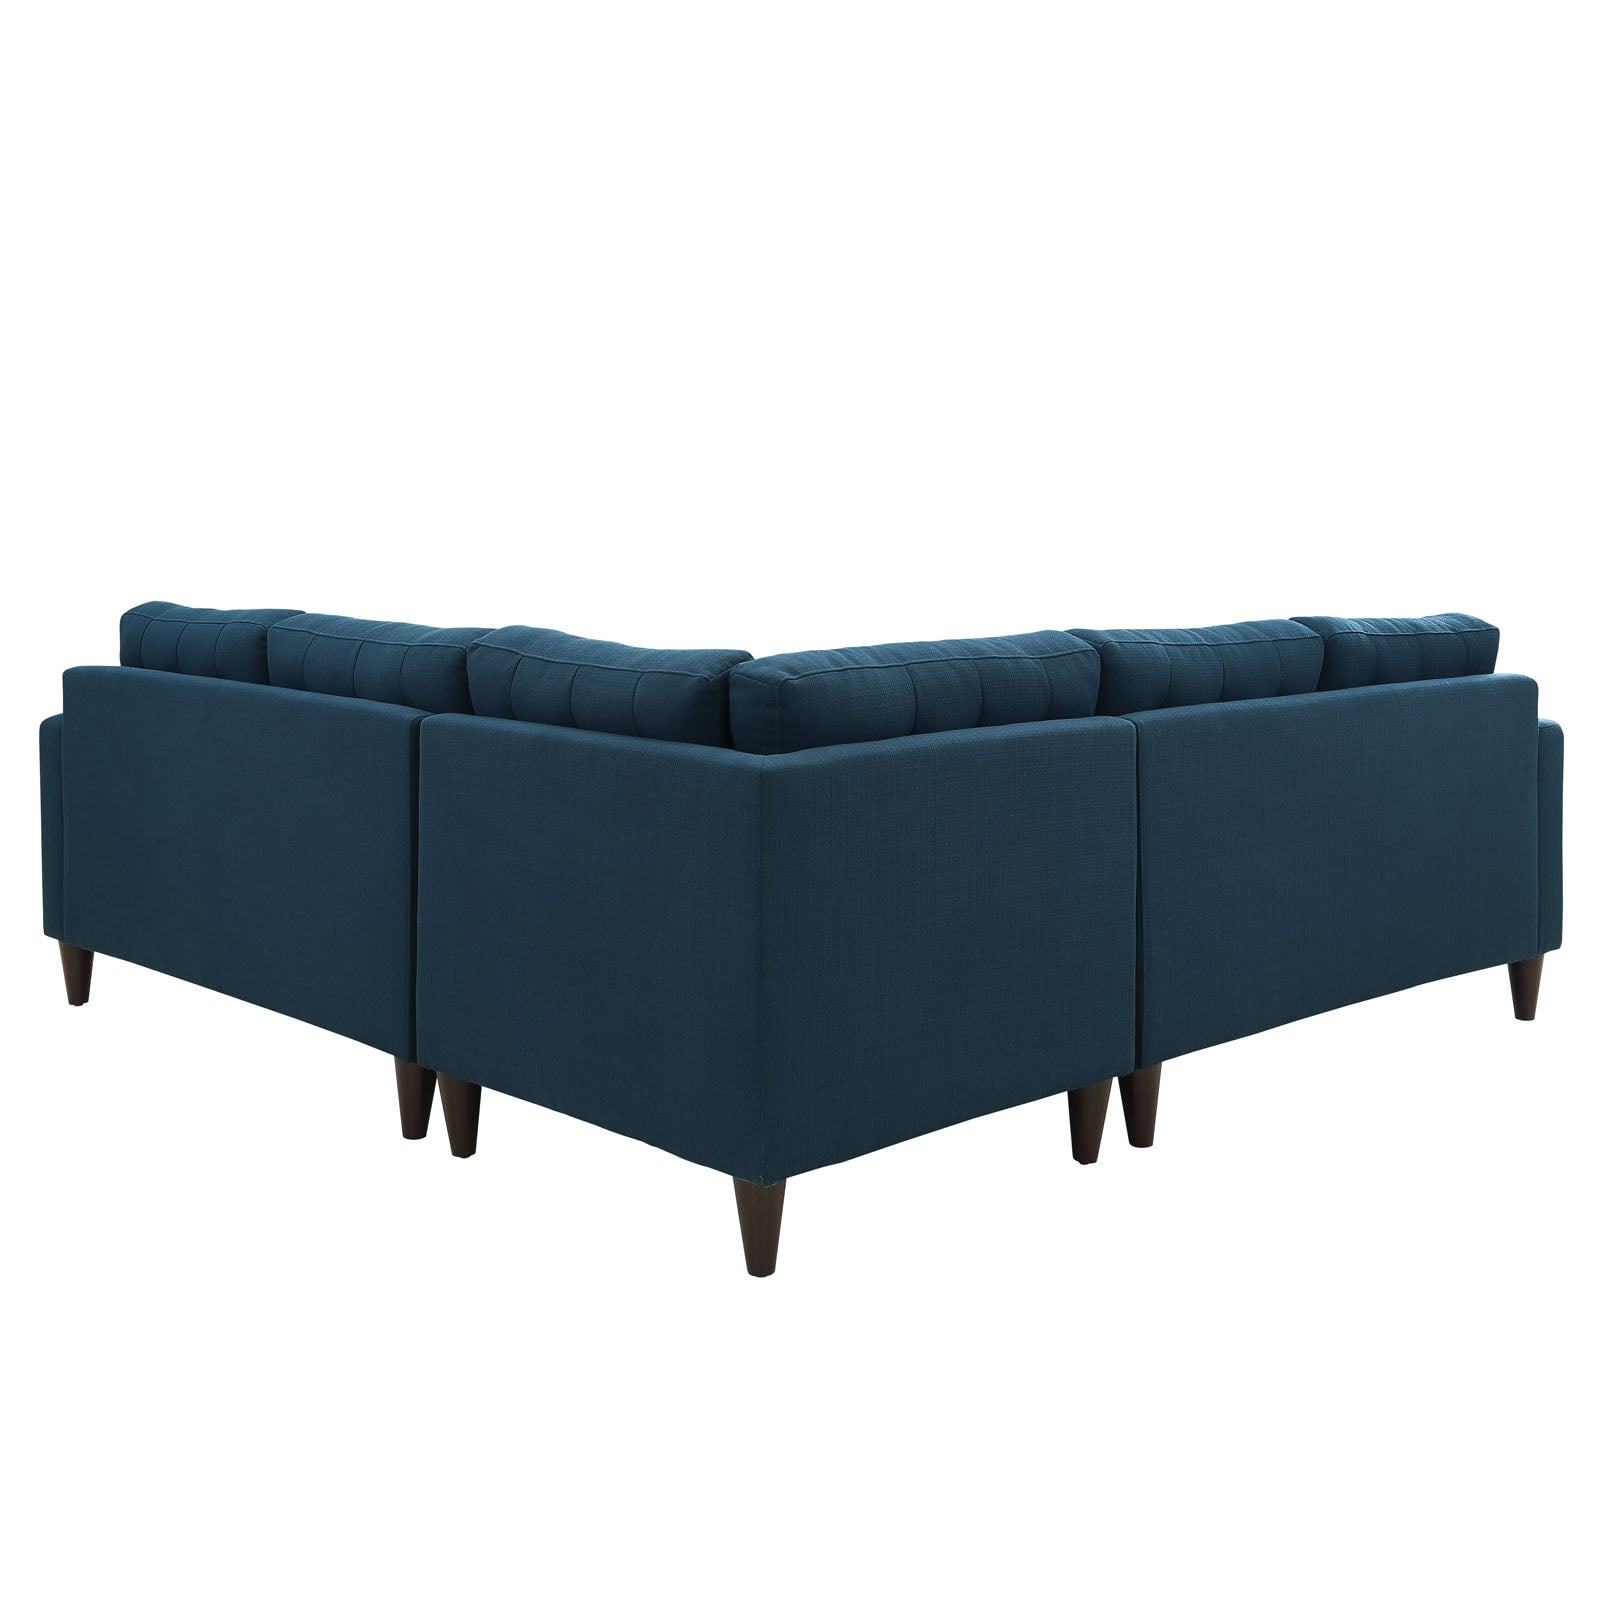 Modway Sectional Sofas - Empress 3 Piece Upholstered Fabric Sectional Sofa Set Azure